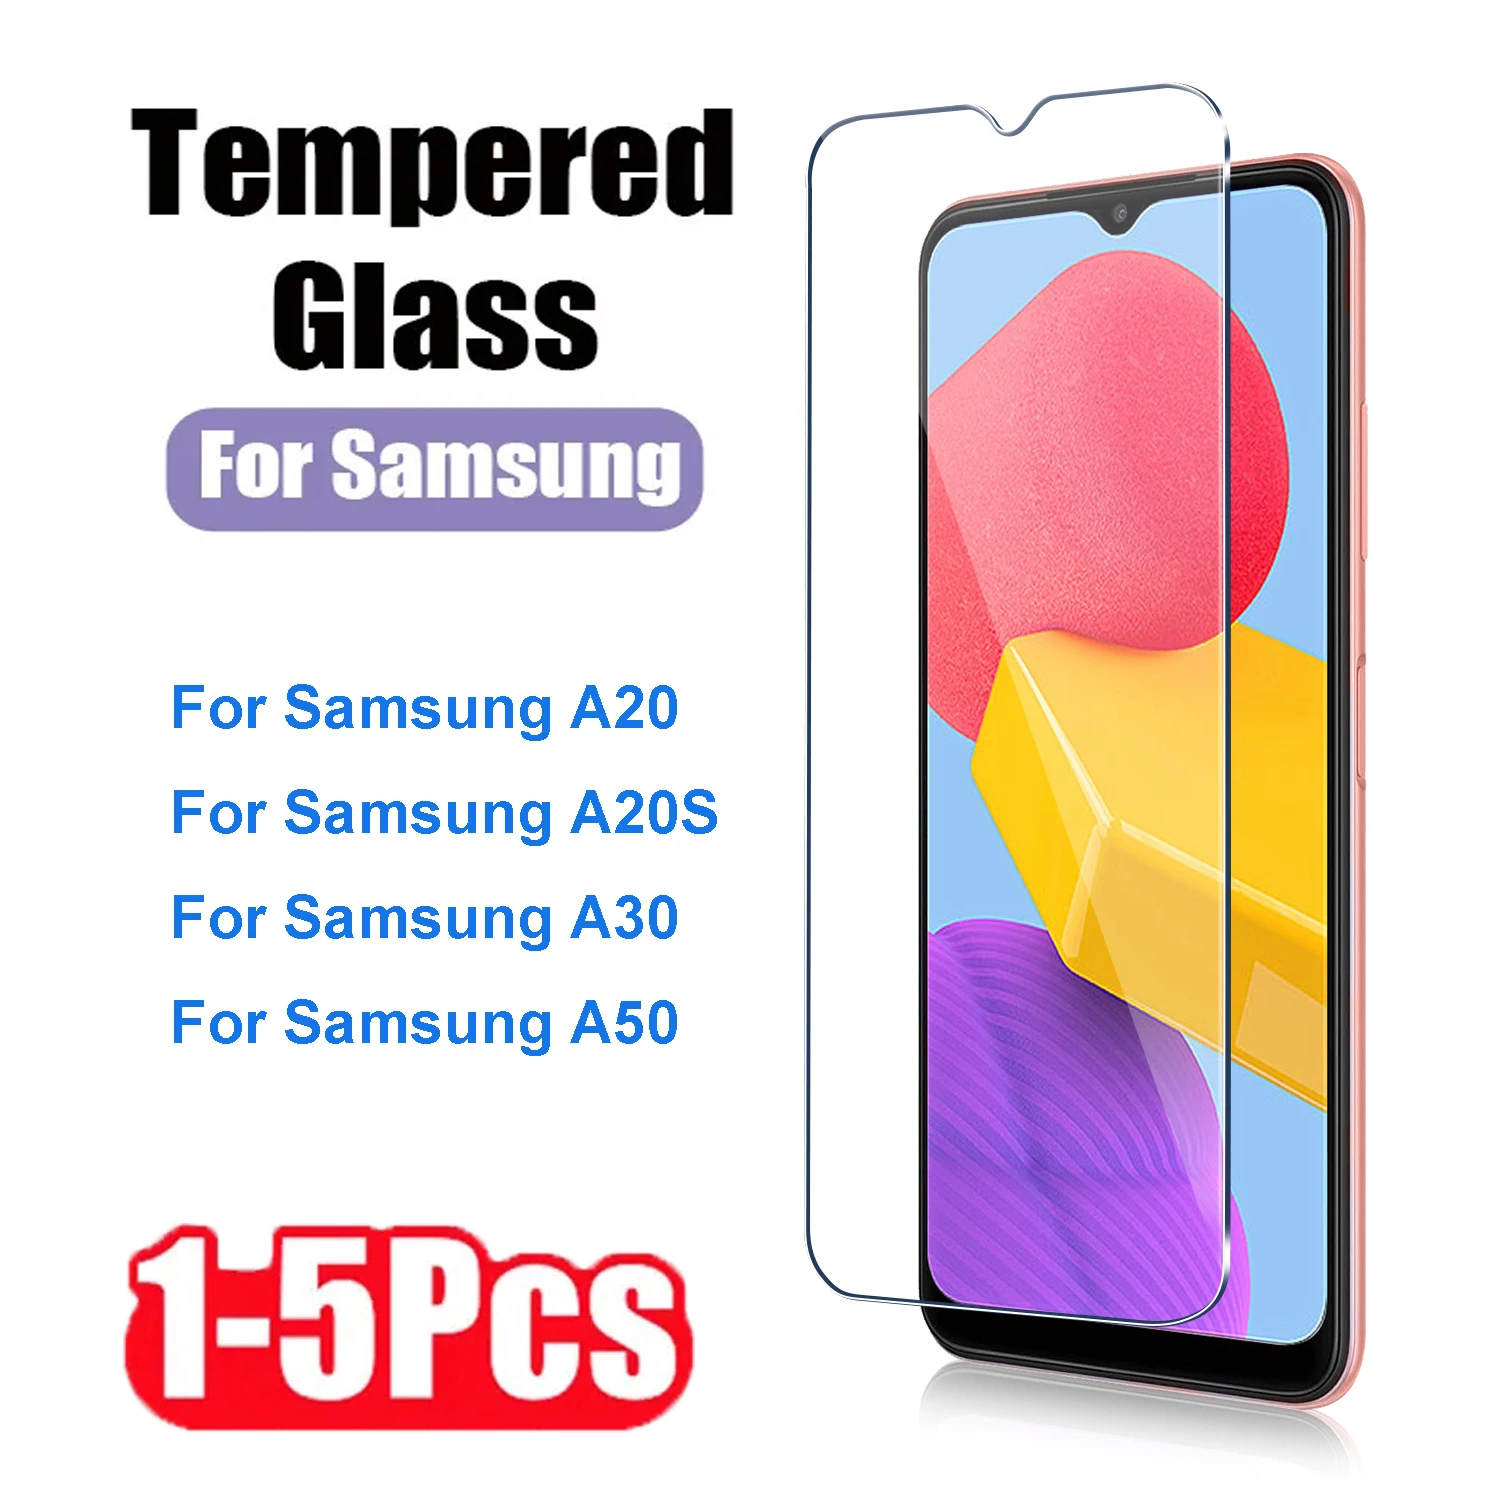 

1-5PCS 9H HD Tempered Glass For Samsung Galaxy A20S A30 A50 Screen Protectors For A50 A30 A20 Glass Films